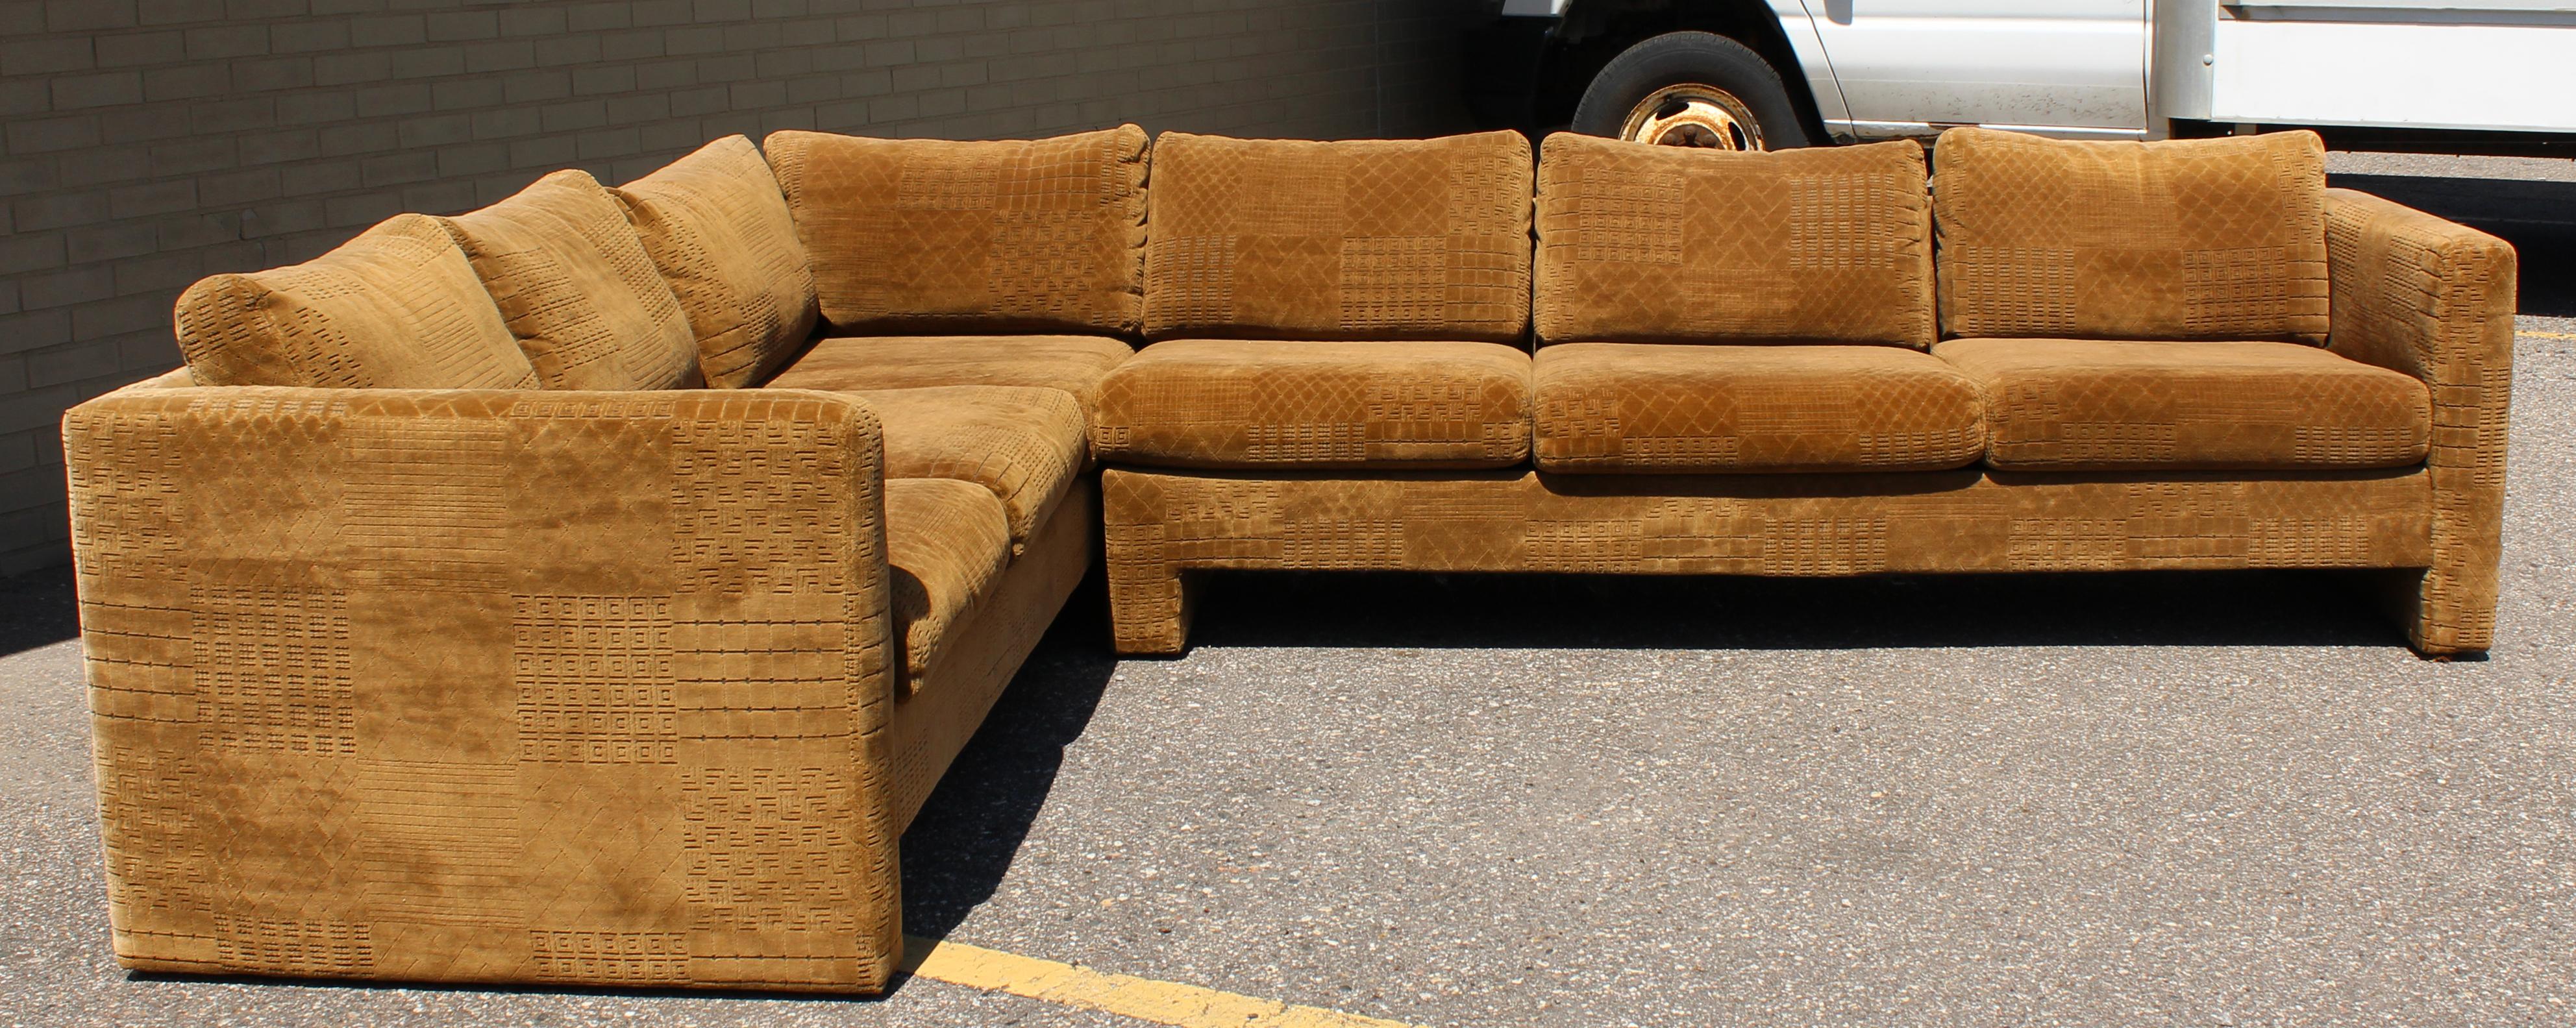 For your consideration is a magnificent sofa sectional by Selig of Monroe, made in Denmark, circa 1970s. This two-piece sectional is uplhostered in an ornate brown velour/velvet fabric. In very good vintage condition. The dimensions are 80